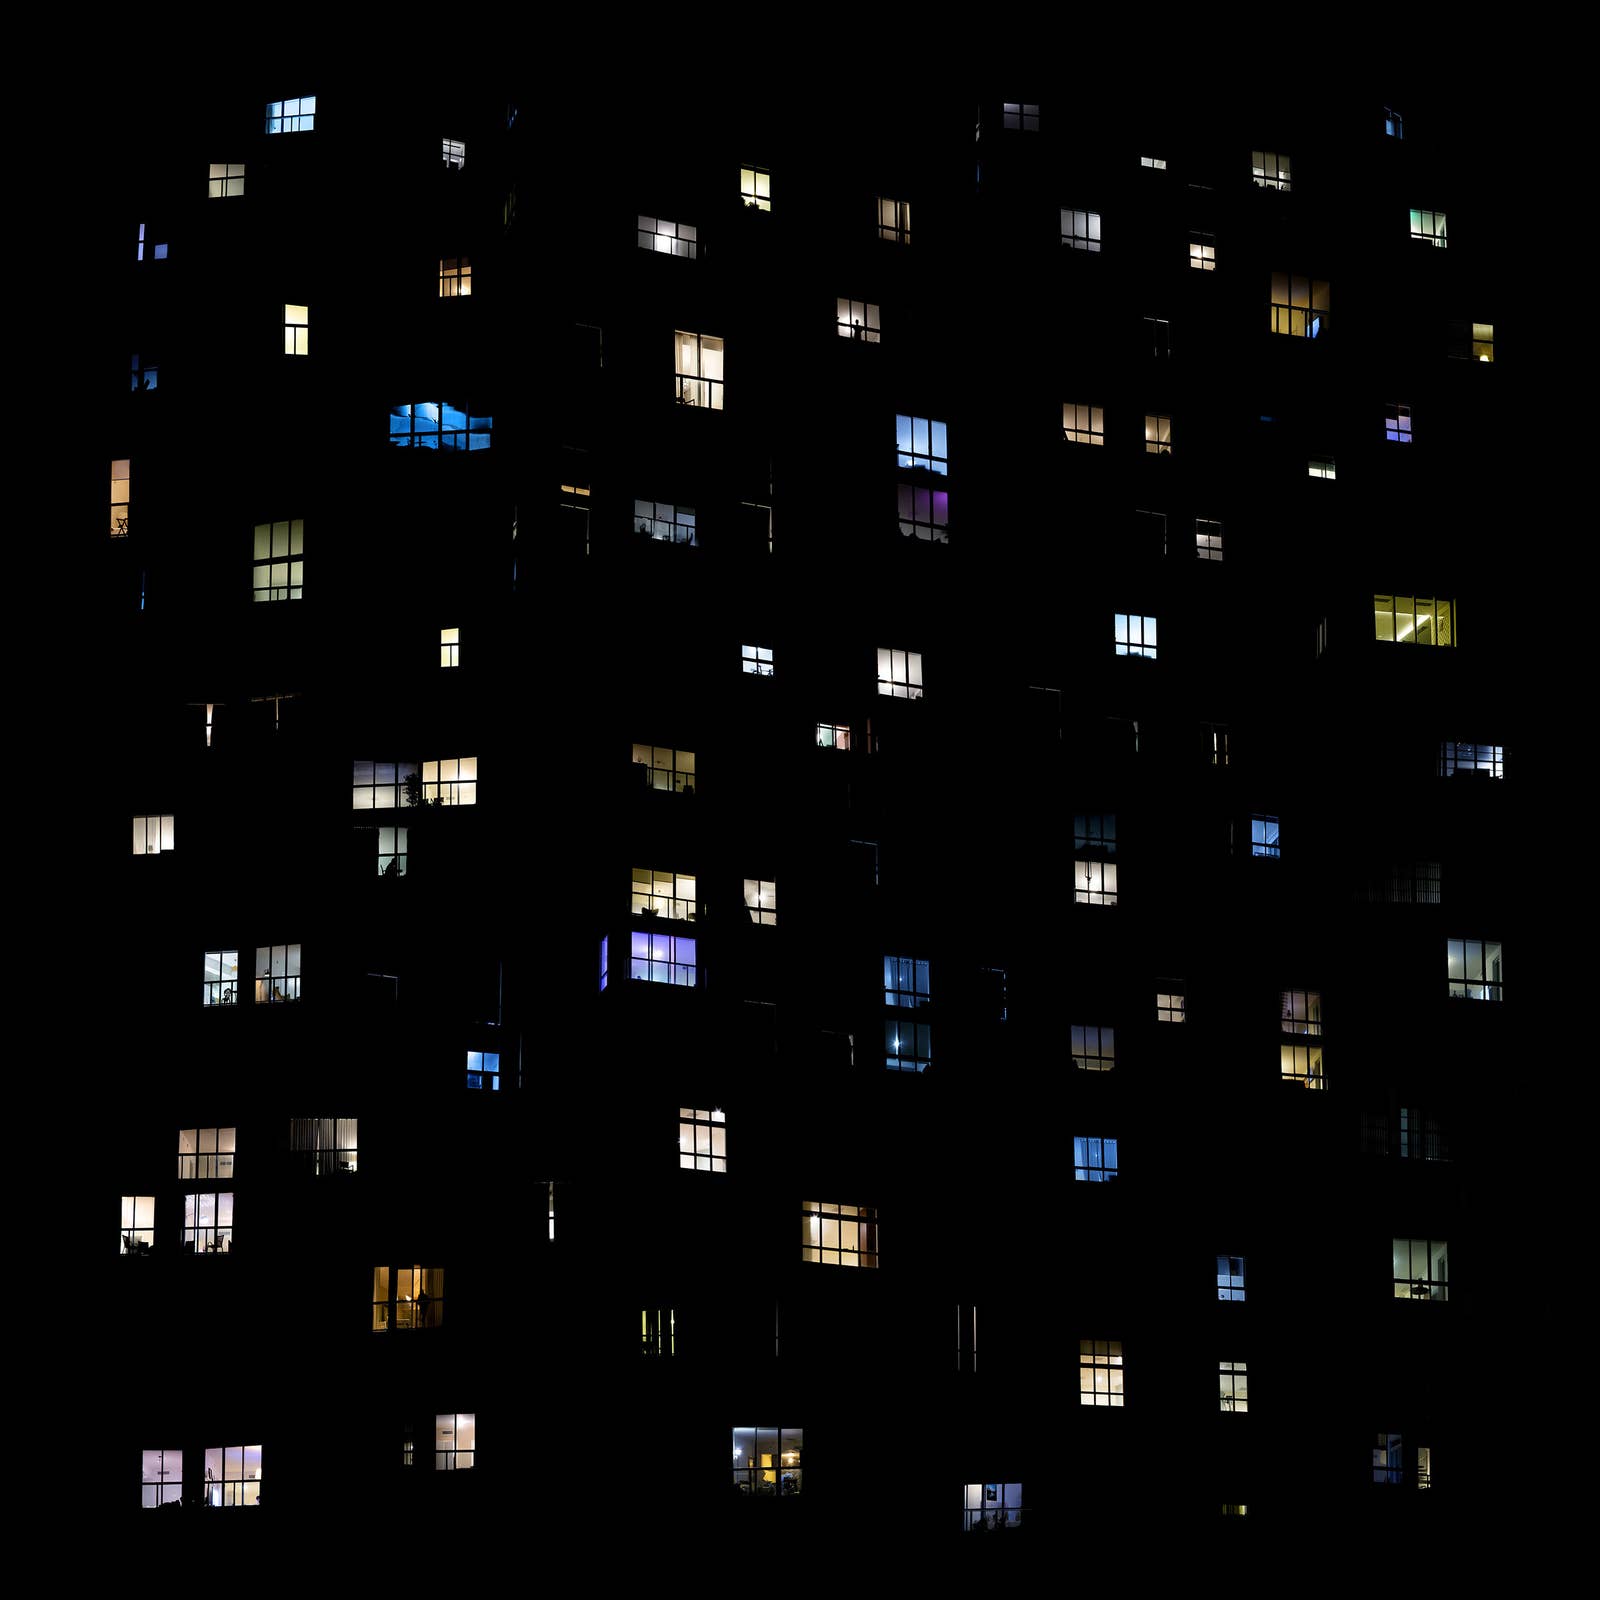 Windows from many apartment buildings